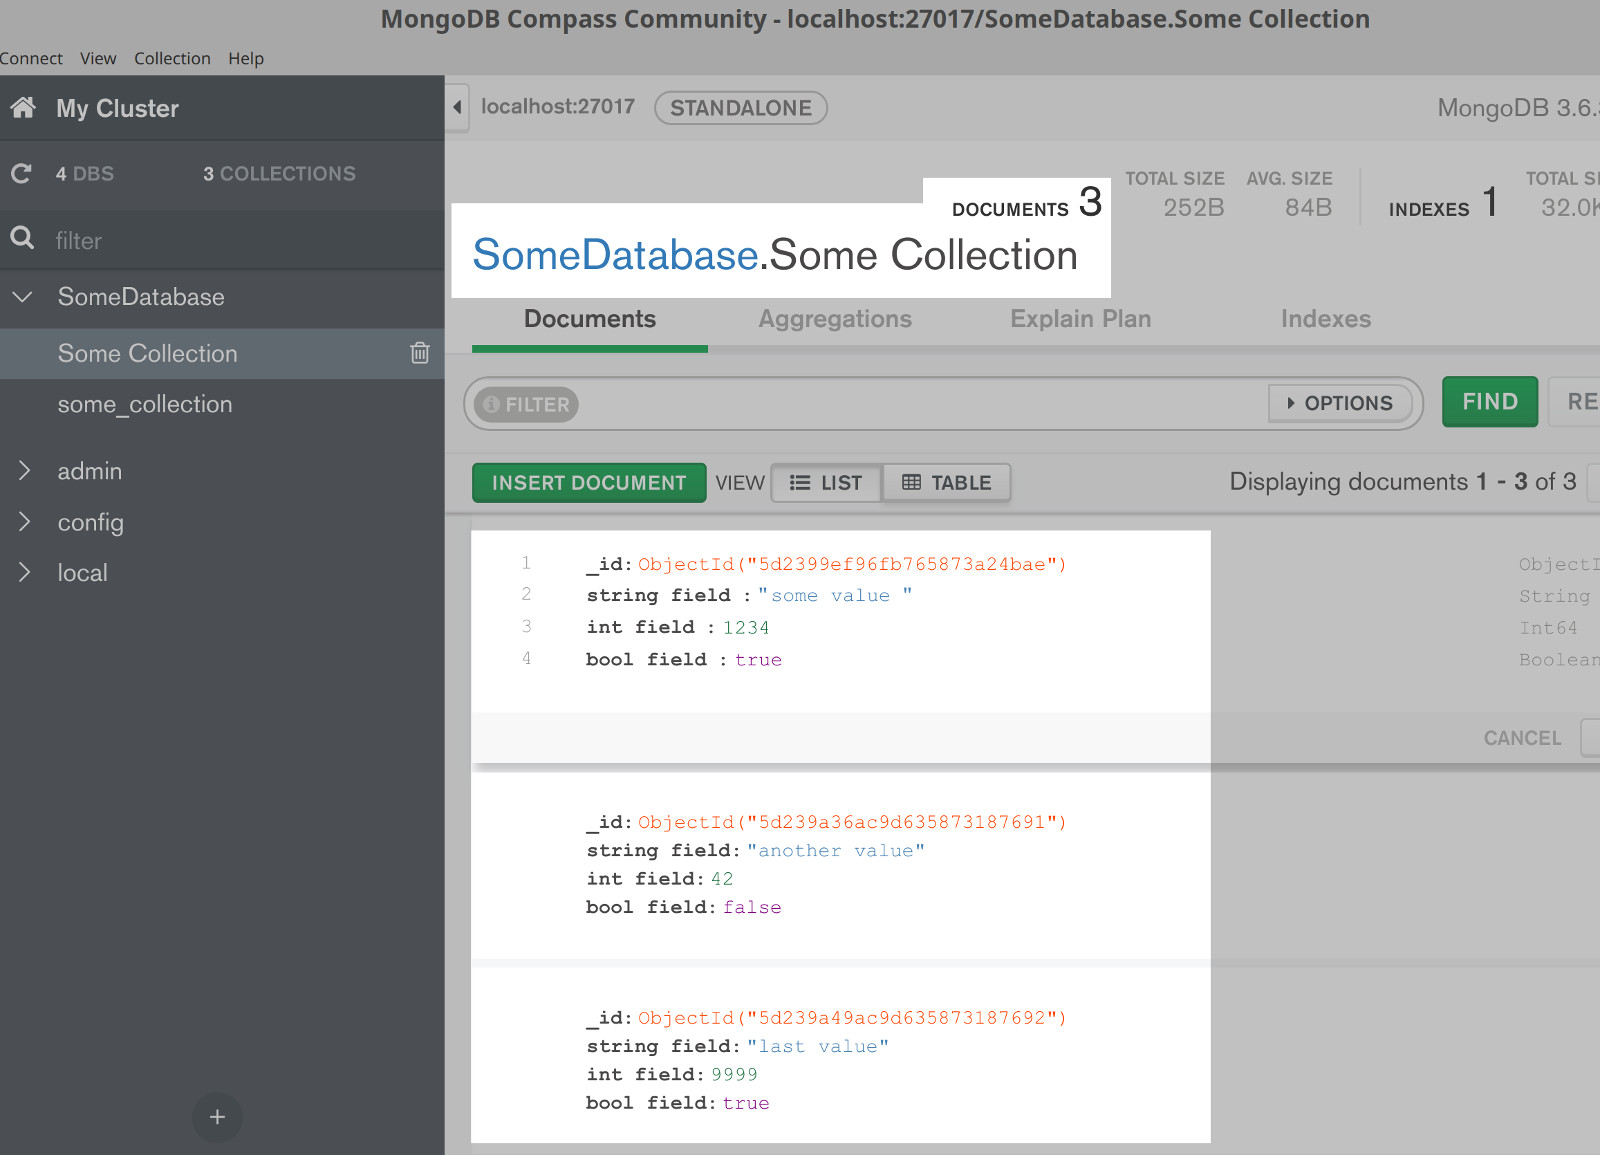 Screenshot of documents in a collection on the MongoDB Compass UI